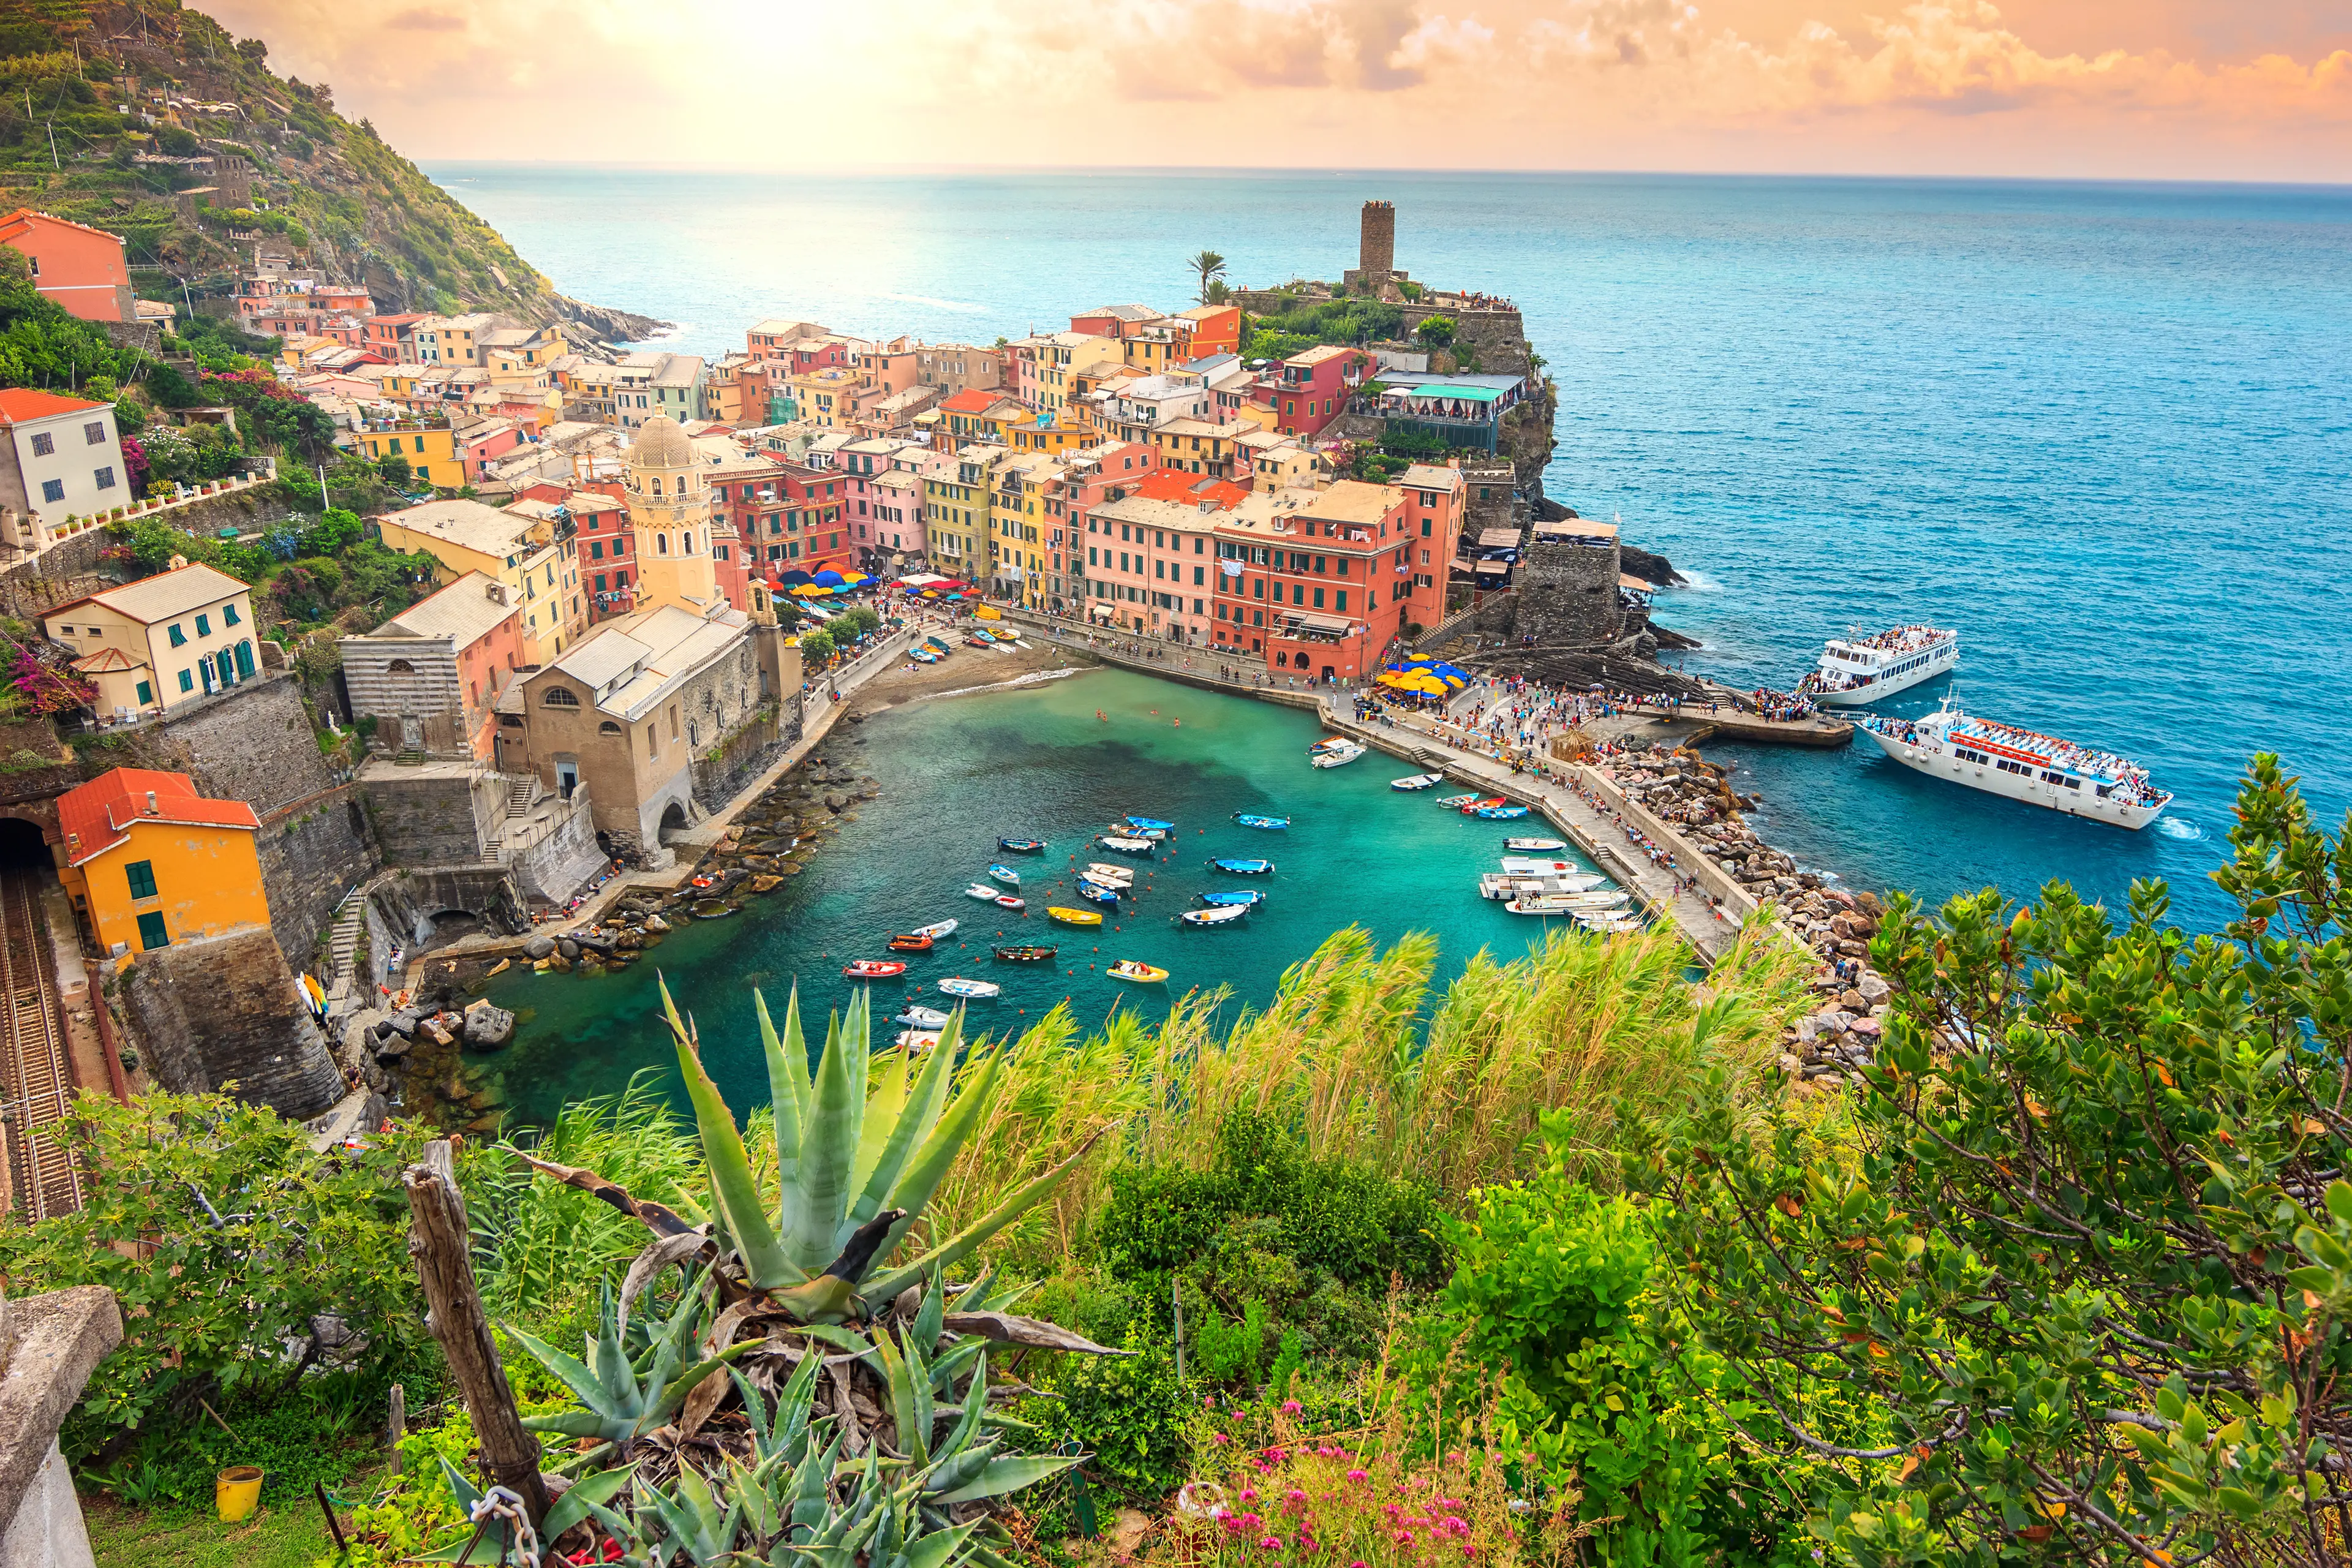 1-Day Offbeat Cinque Terre Itinerary: Nightlife & Sightseeing with Friends